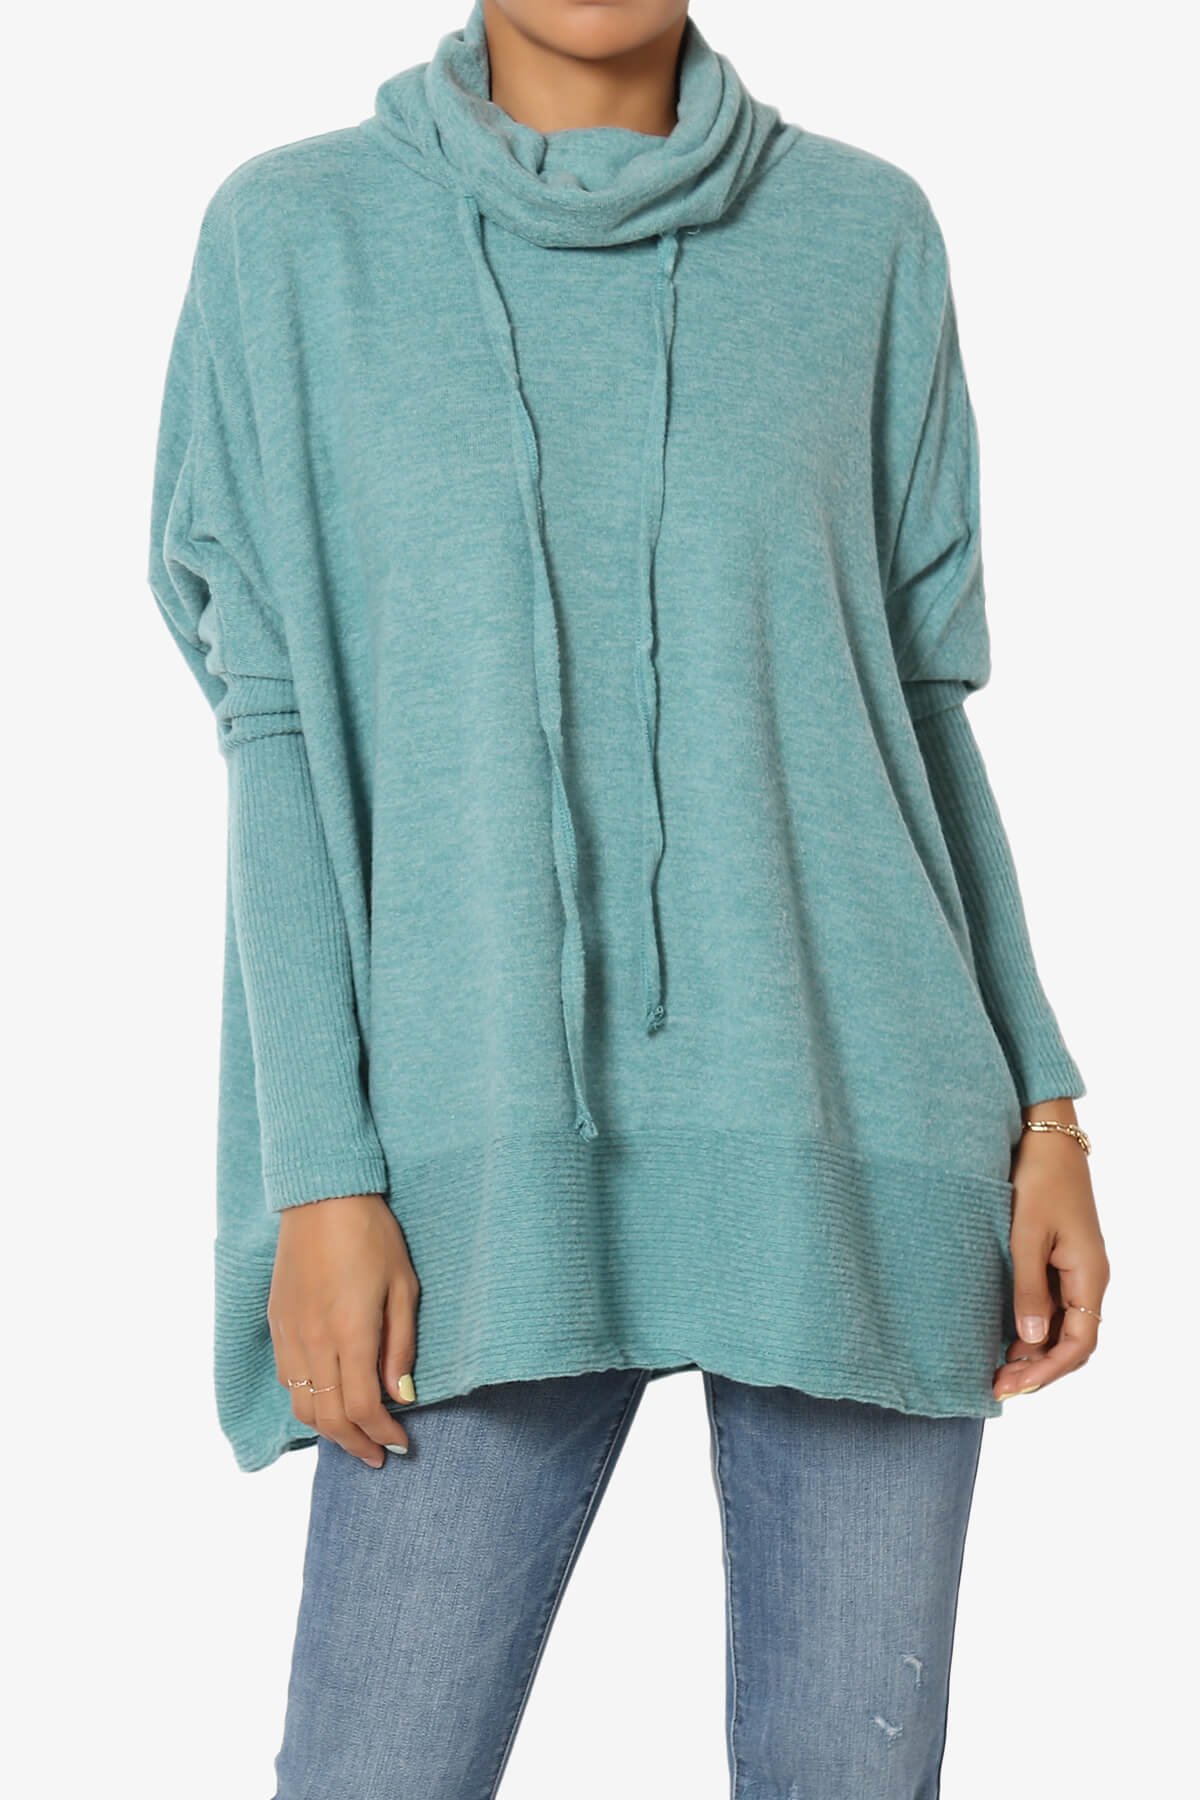 Load image into Gallery viewer, Barclay Cowl Neck Melange Knit Oversized Sweater DUSTY TEAL_1
